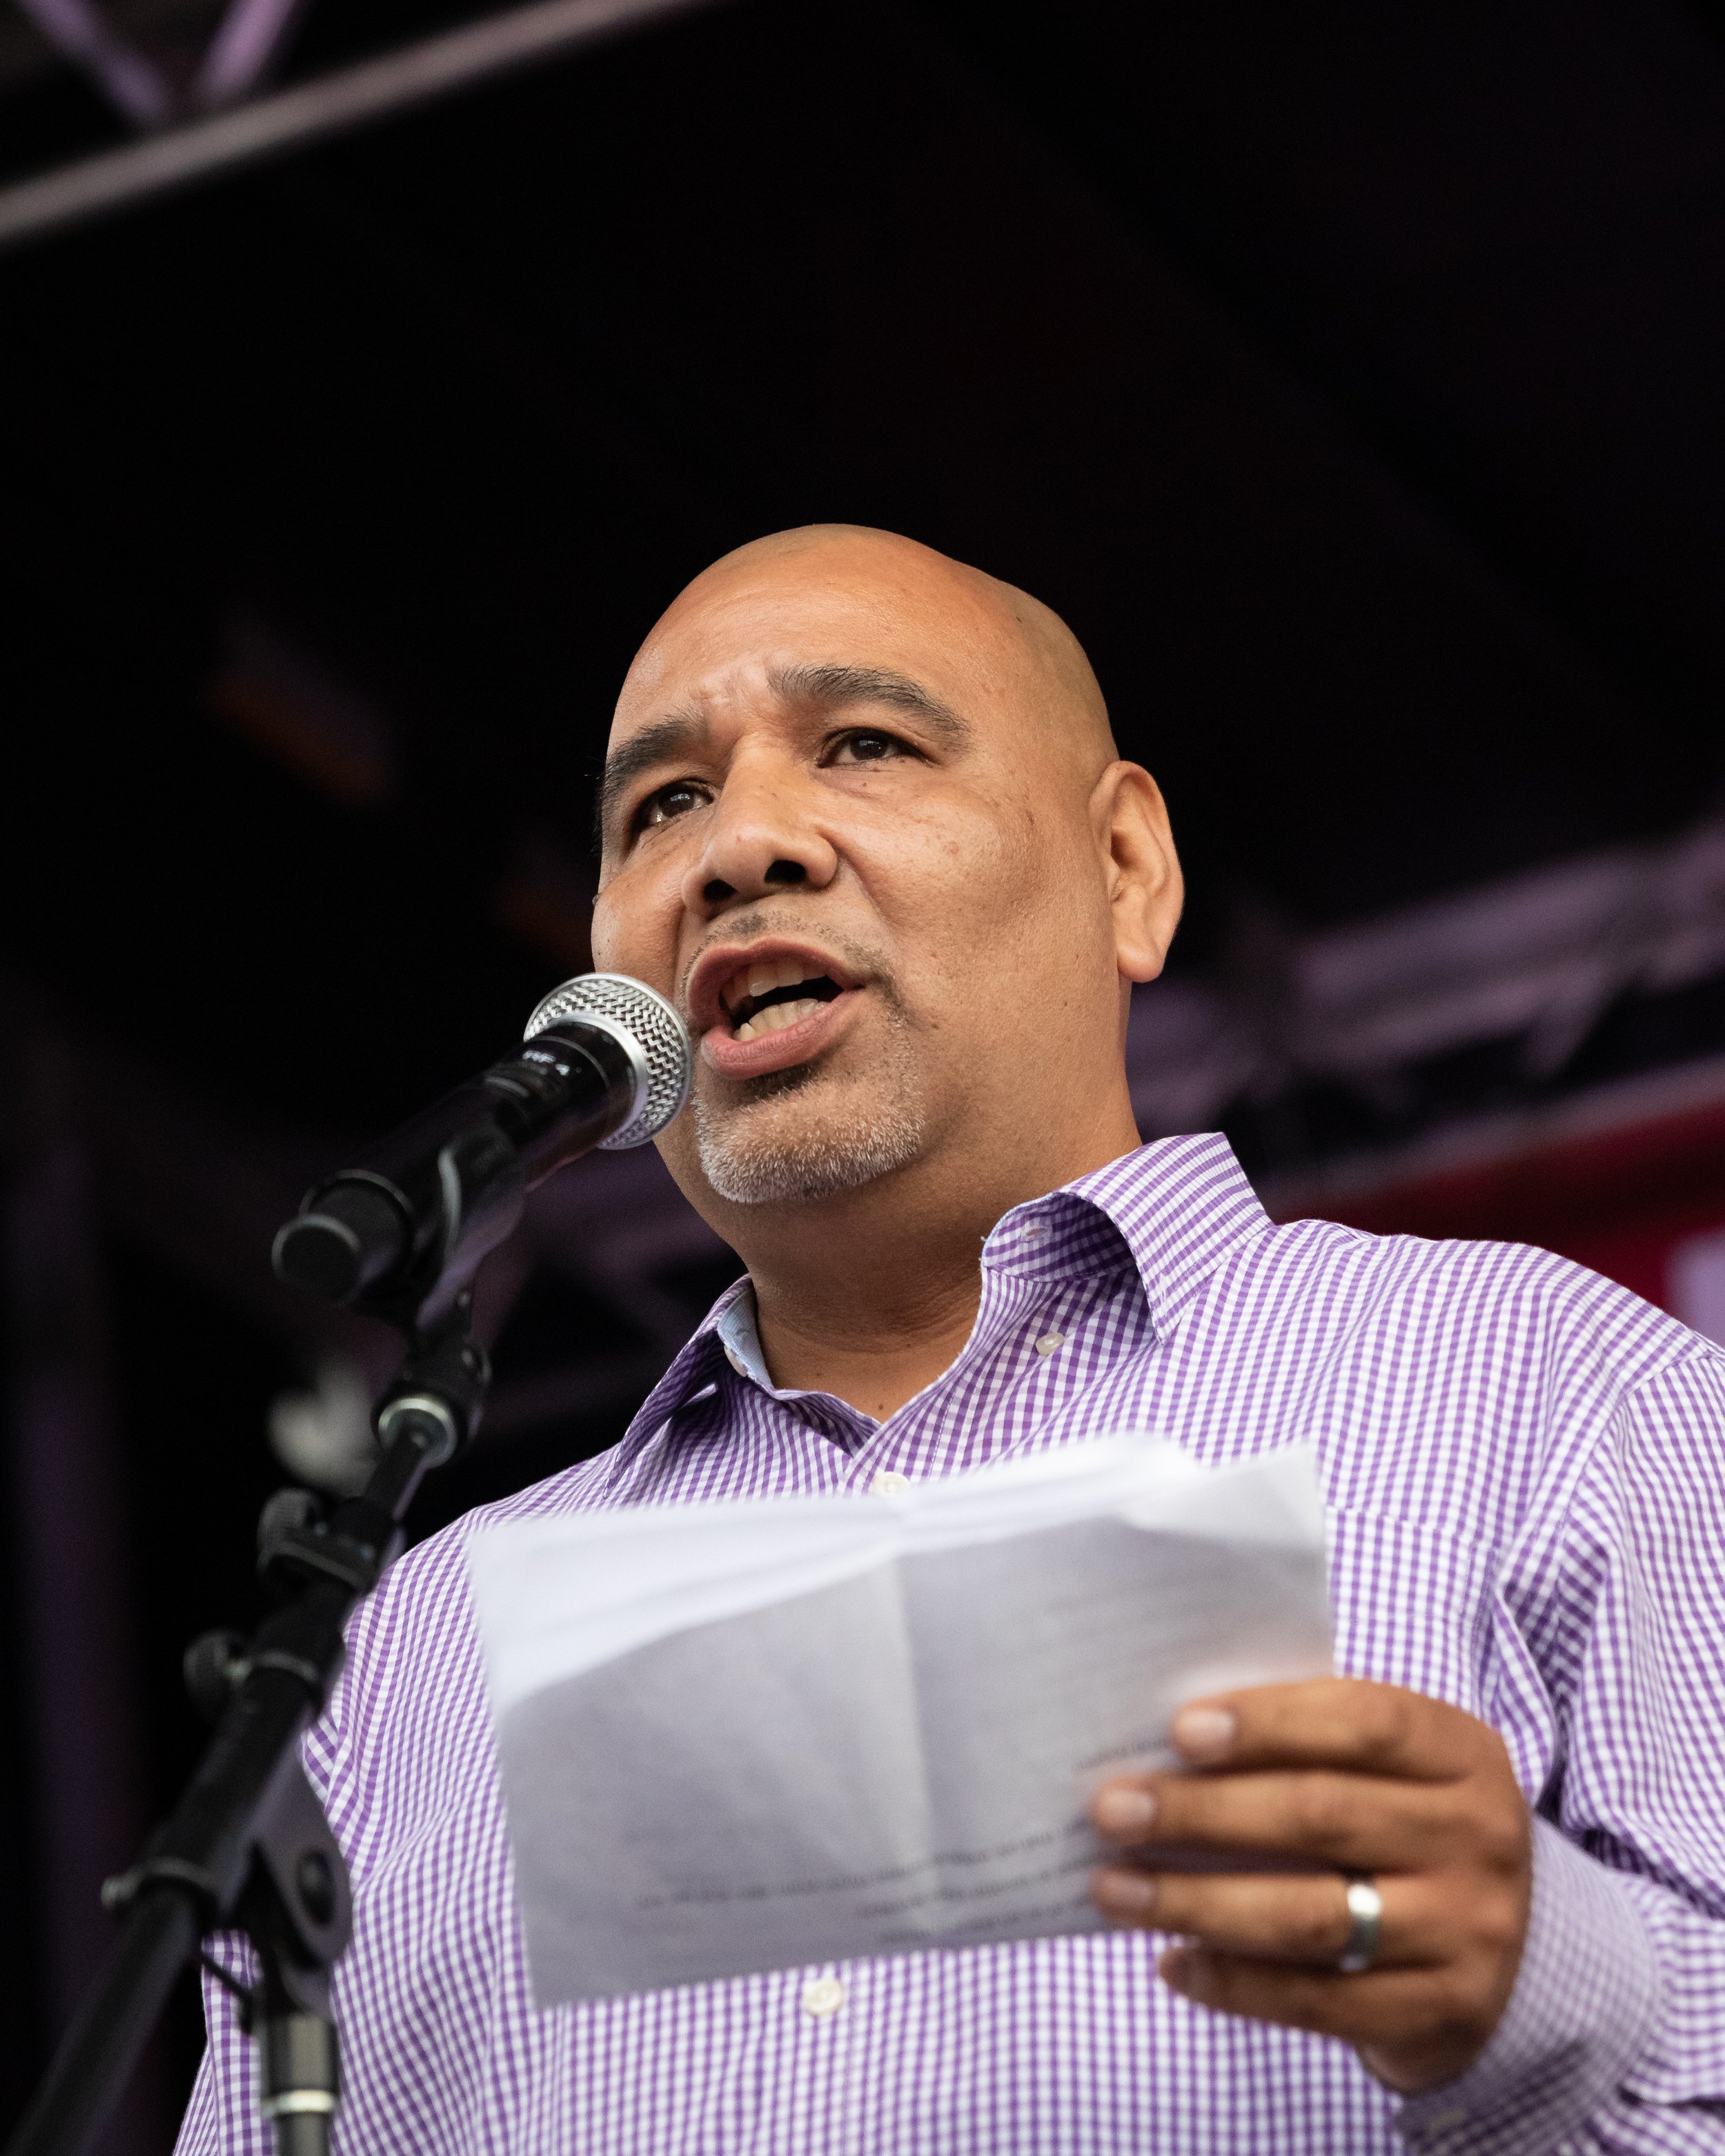  Service Employees International Union (SEIU) Local 99 president Conrado Guerrero speaking at a joint rally with United Teachers Los Angeles outside Los Angeles City Hall to announce the dates of a three-day strike in Los Angeles, Calif., on Wednesda